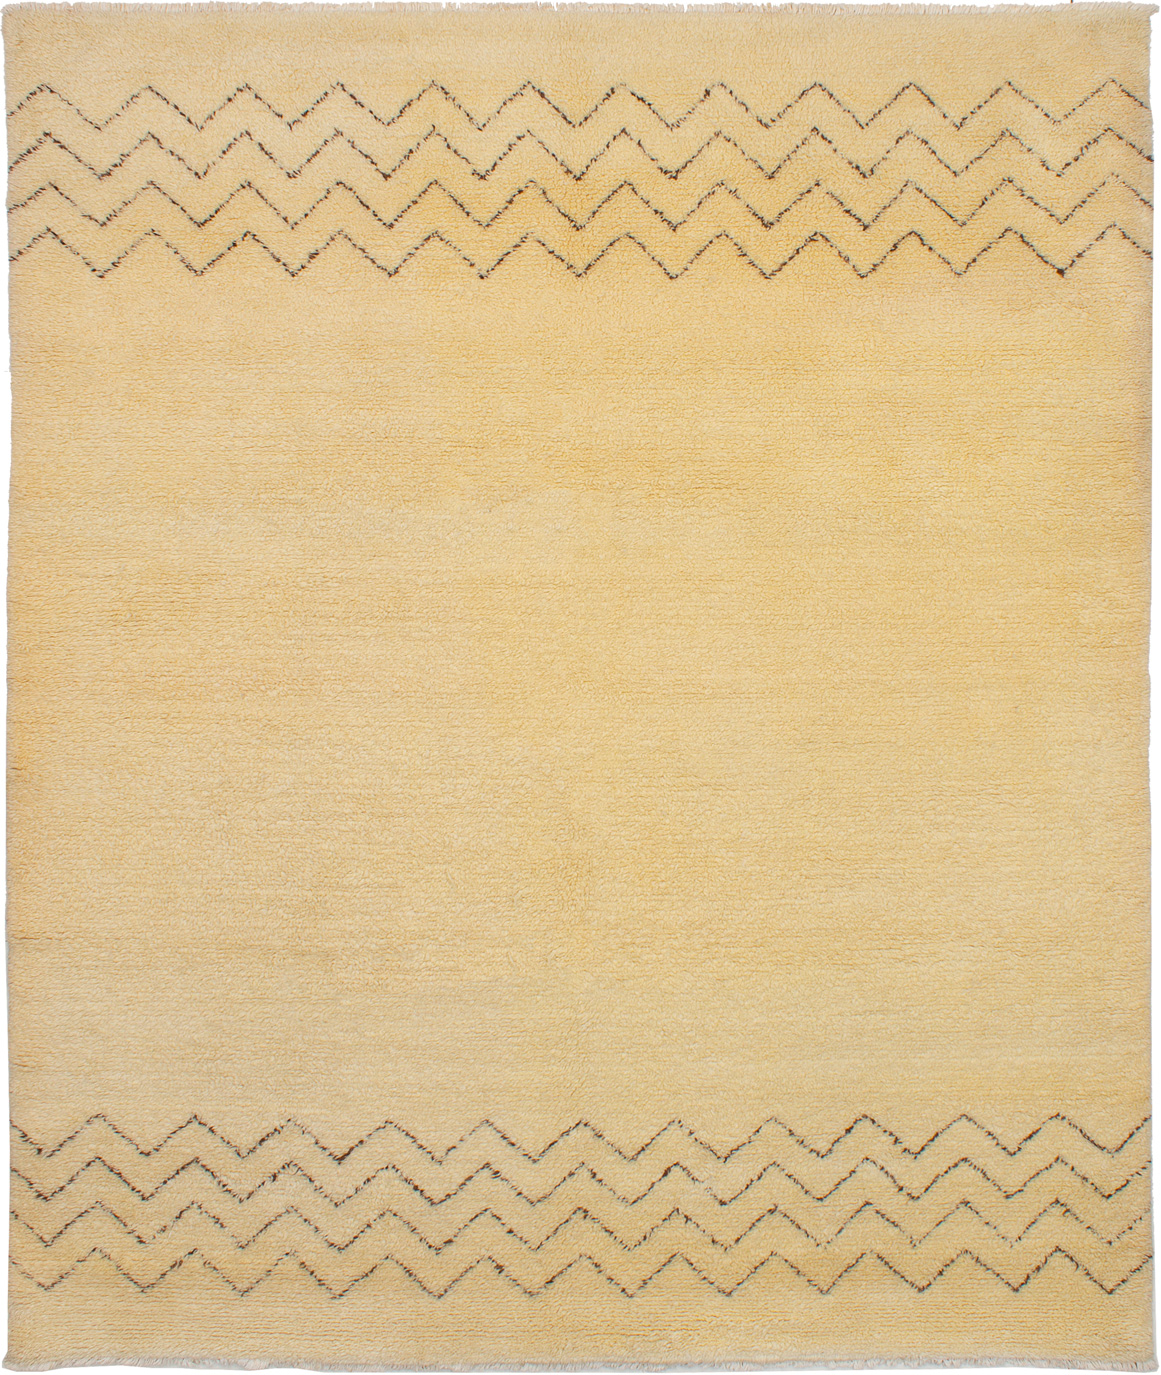 Hand-knotted Royal Maroc Cream Wool Rug 8'1" x 9'7" Size: 8'1" x 9'7"  